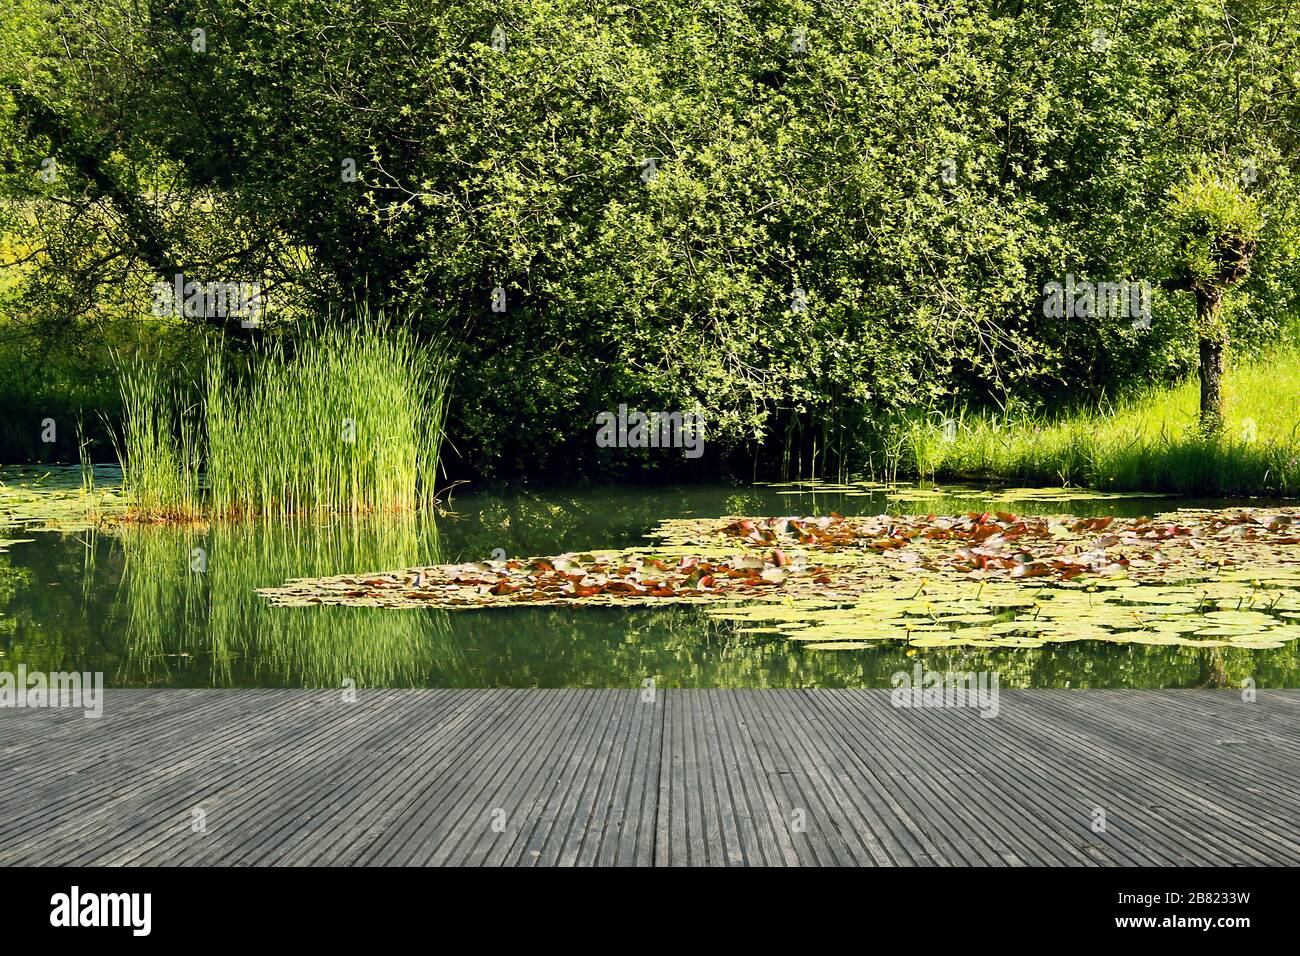 Terrace with a wonderful view. Garden pond with water lilies and green banks. Living with joy in nature. Germany Stock Photo